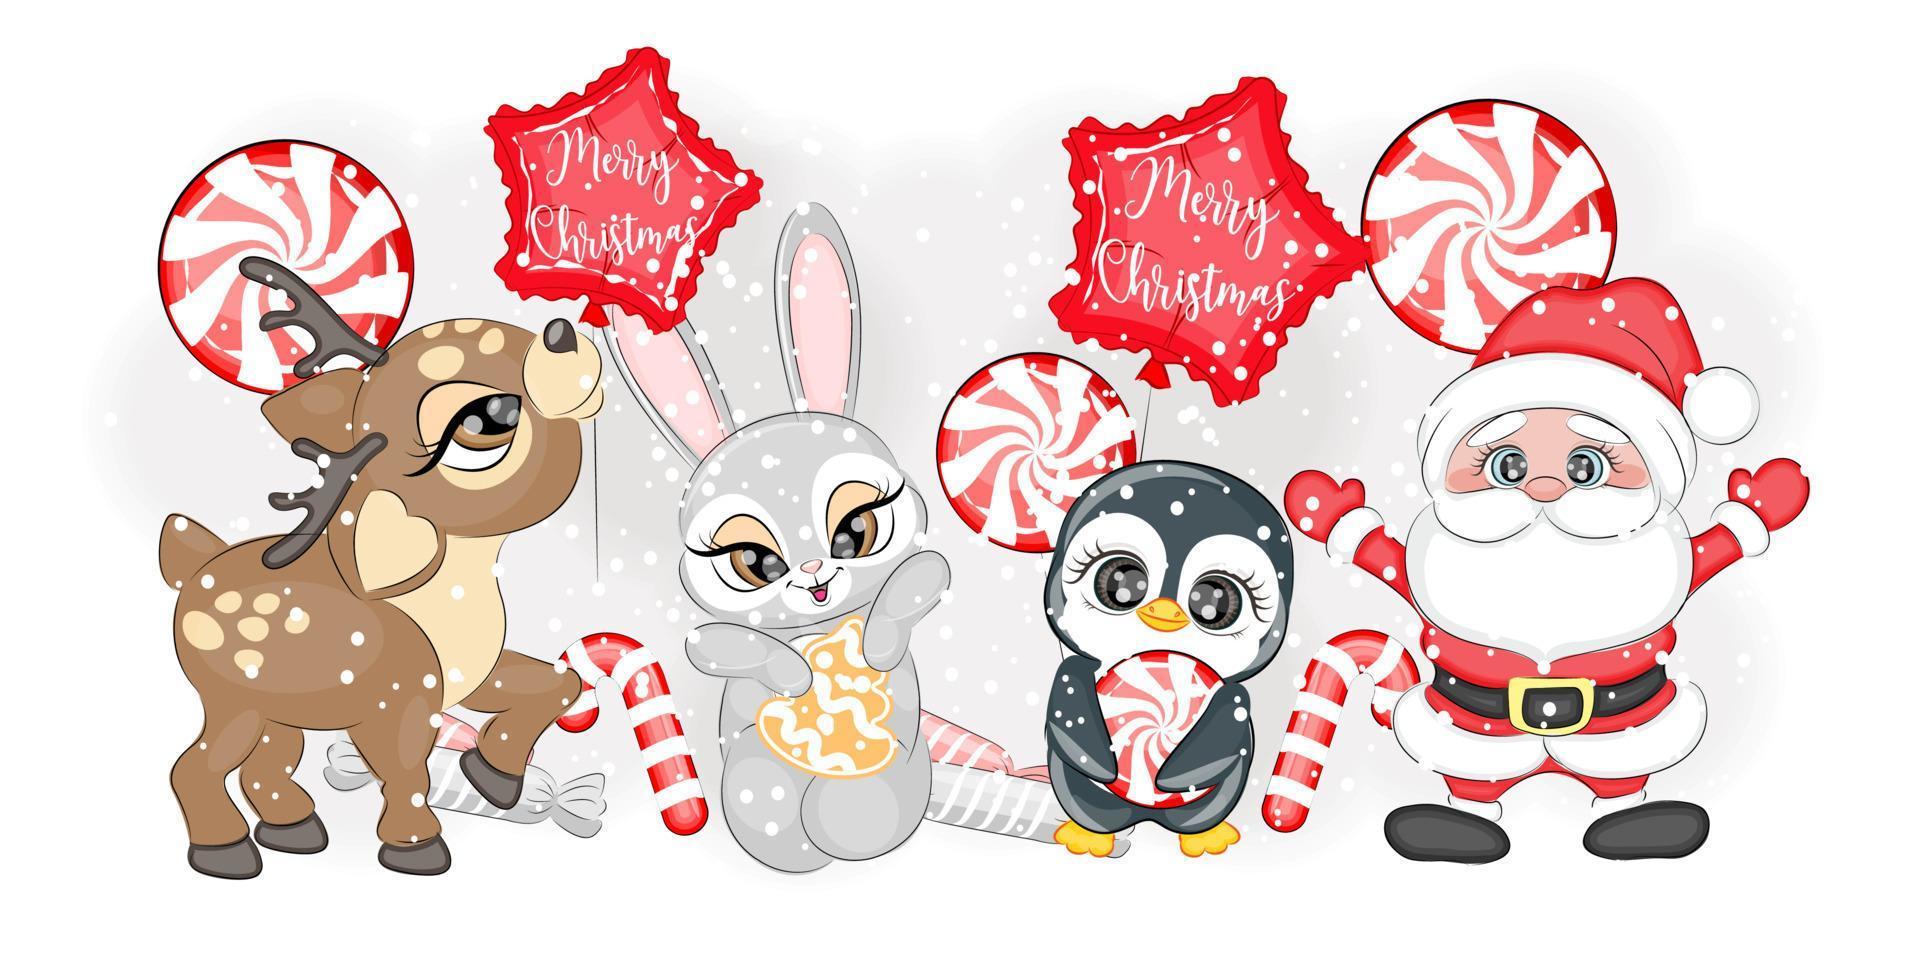 Cute Christmas Hare reindeer penguin and Santa Claus vector illustration